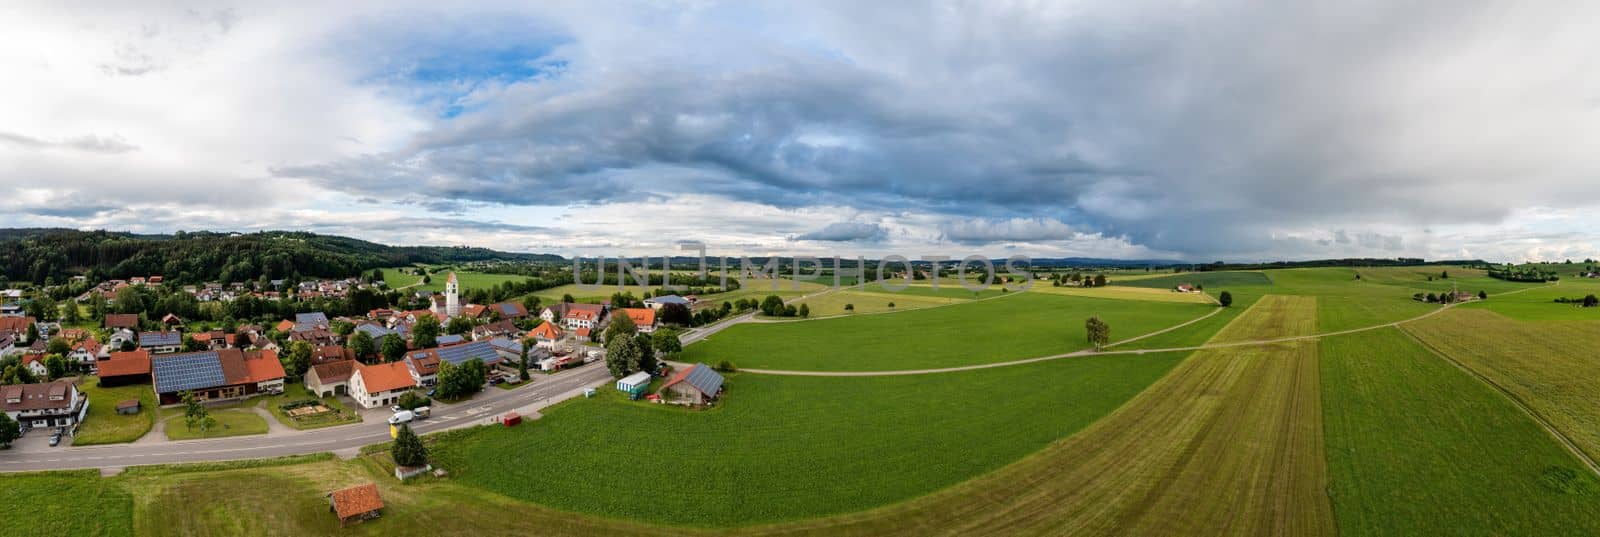 Stunning panoramic view of a small village green countryside and cloudy sky in Germany